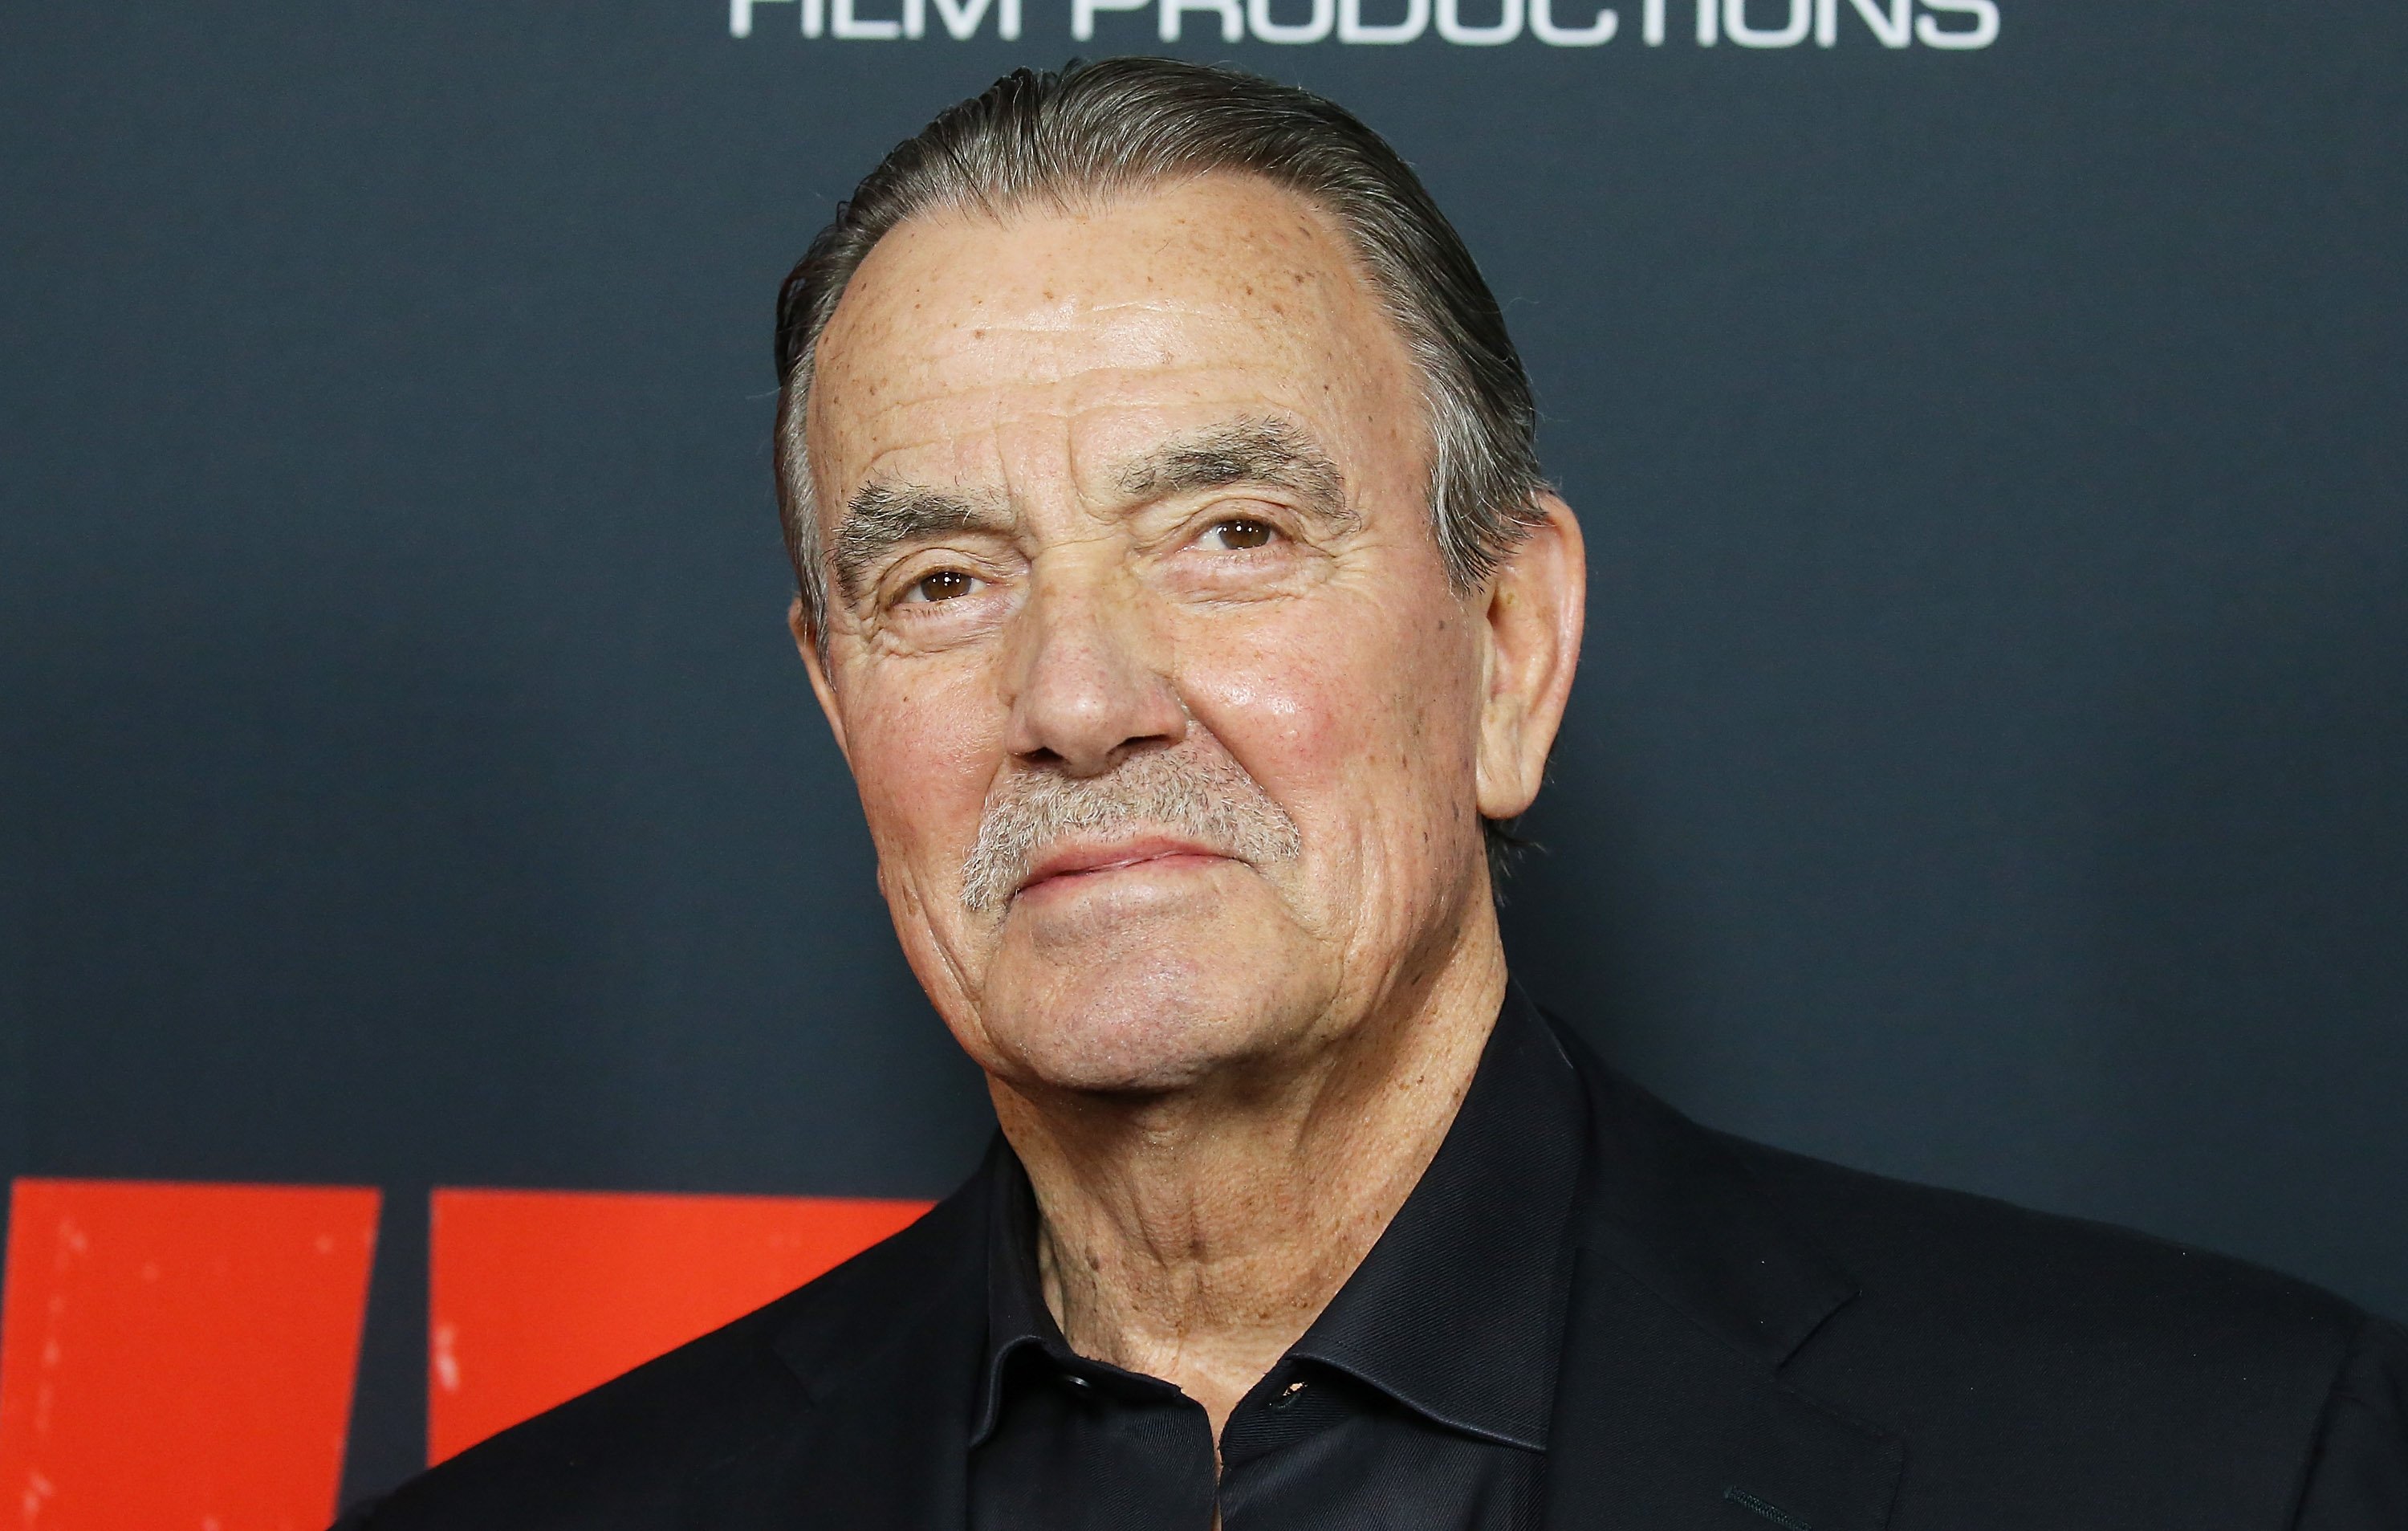 'The Young and the Restless' star Eric Braeden in a black suit, poses on the red carpet.